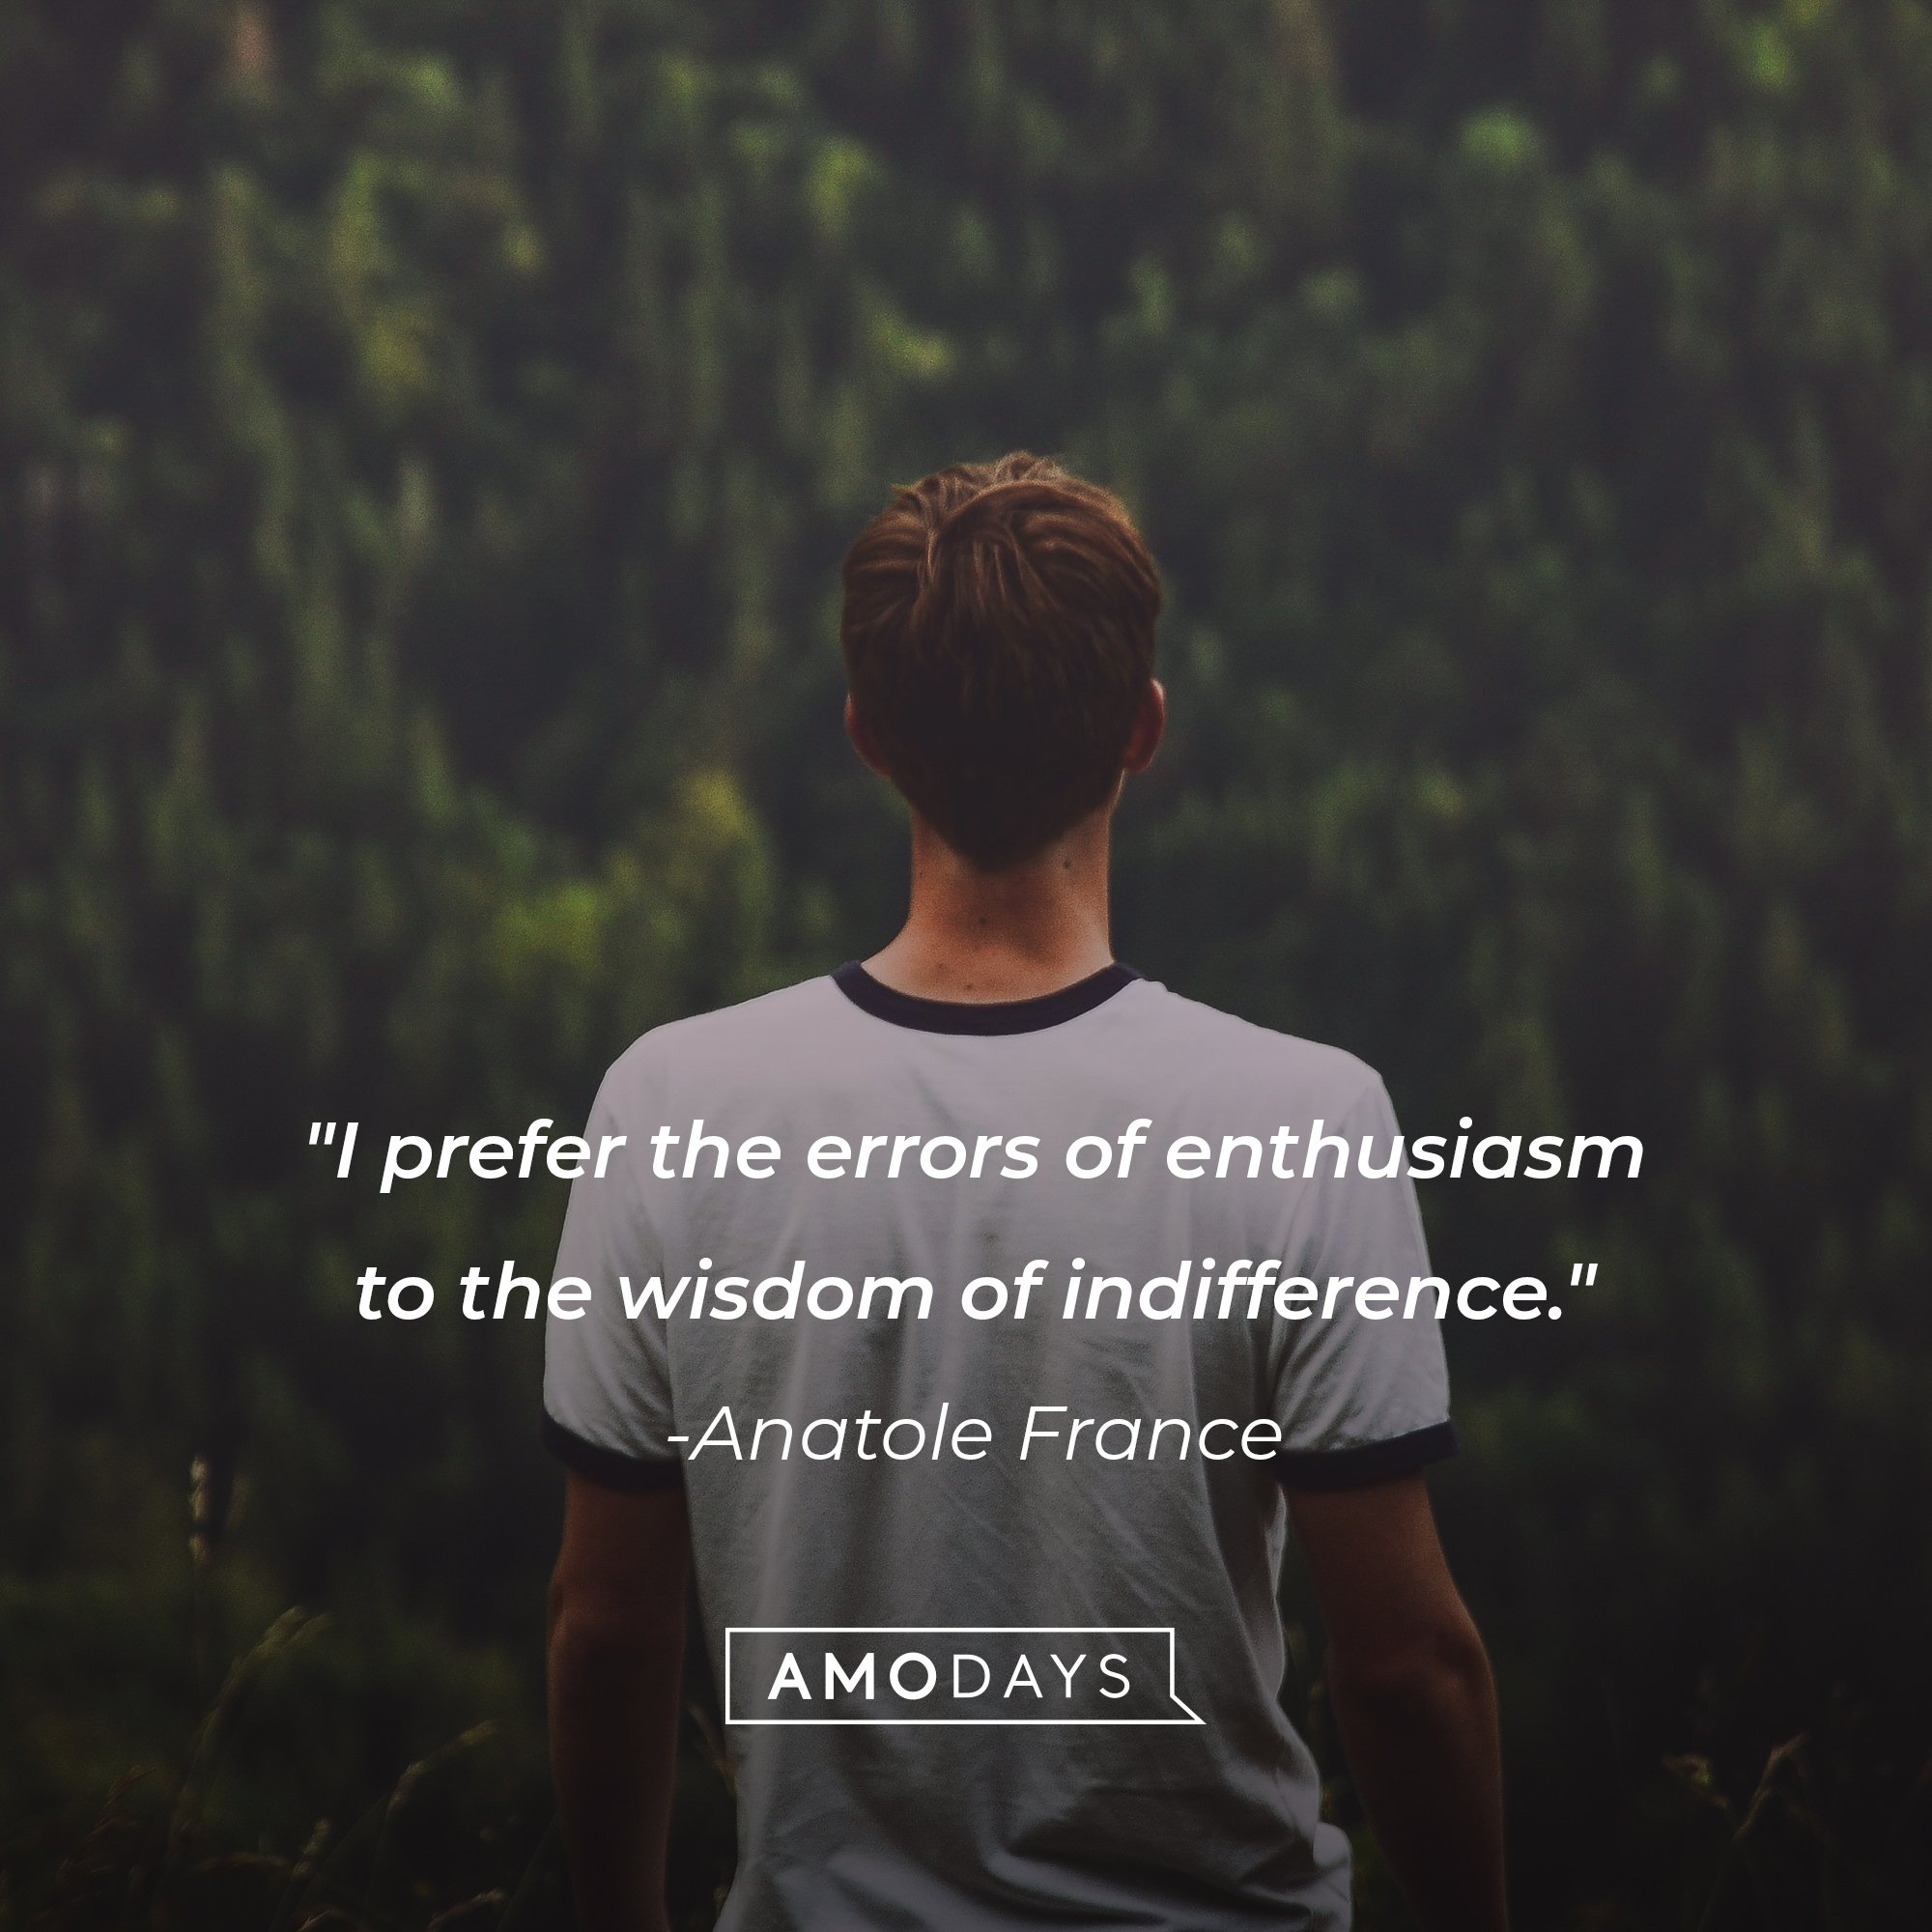 Anatole France's quote: "I prefer the errors of enthusiasm to the wisdom of indifference." | Image: AmoDays